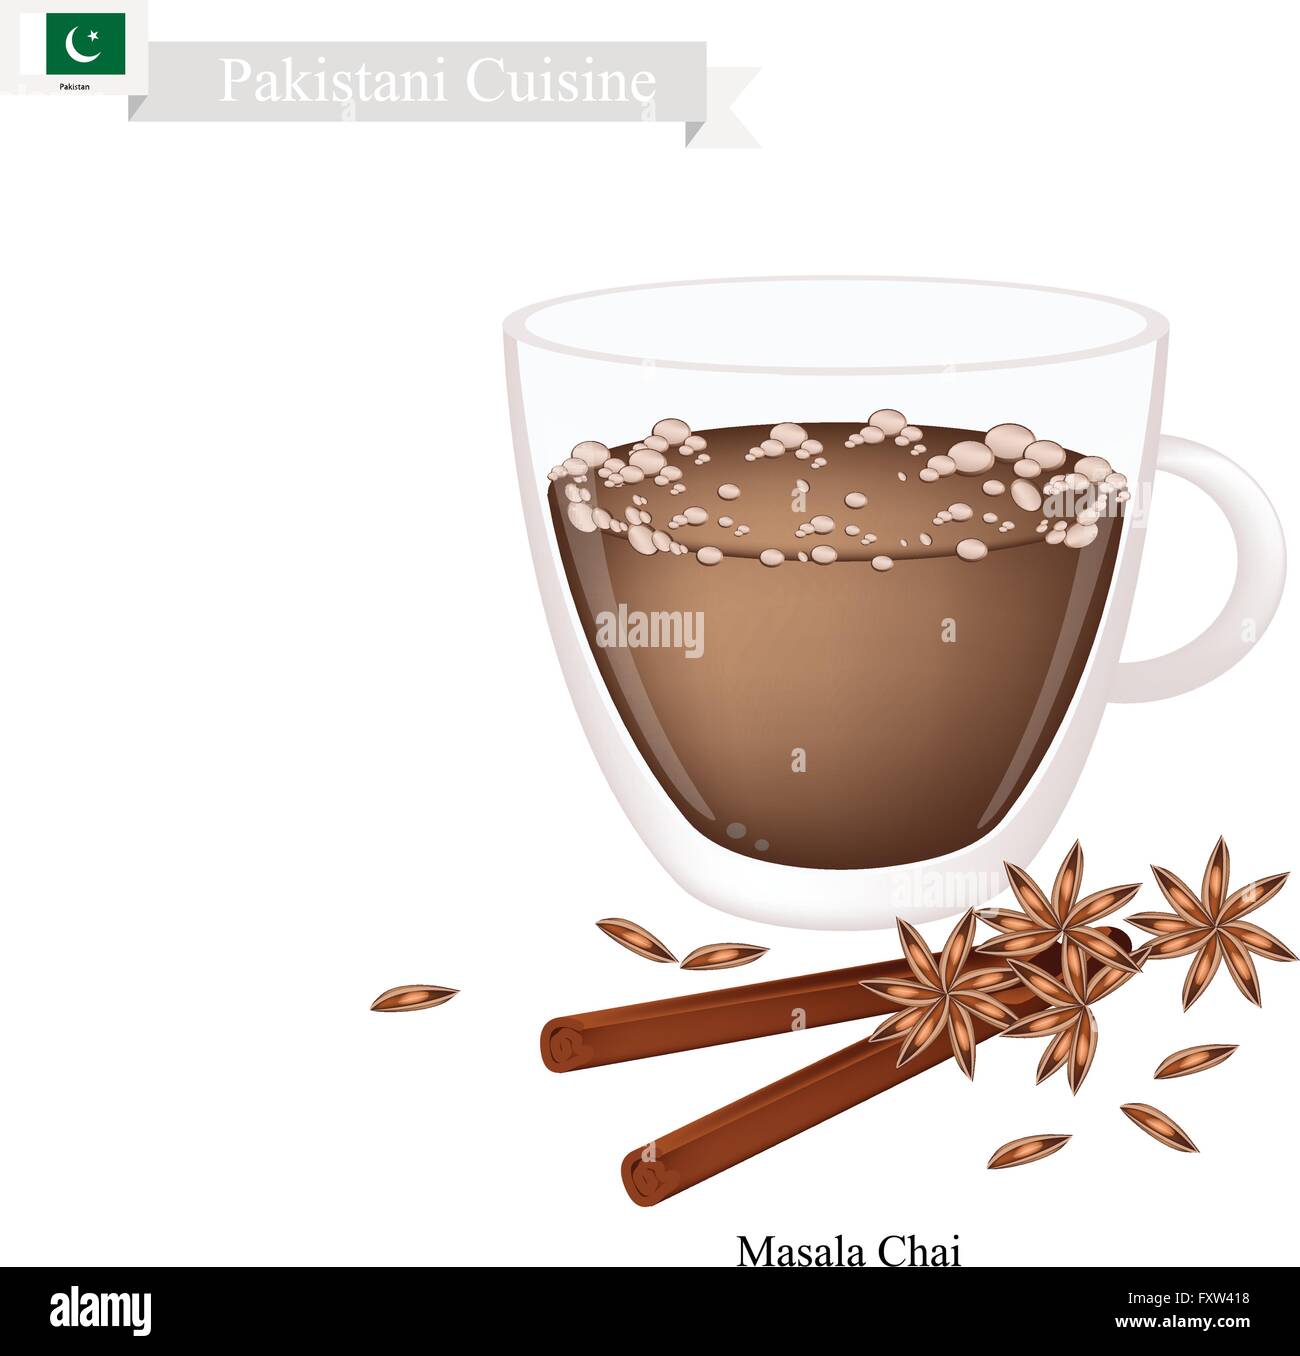 Pakistani Cuisine, Masala Chai or Traditional Black Hot Sweet Tea with Spices. One of The Most Popular Beverage in Pakistan. Stock Vector